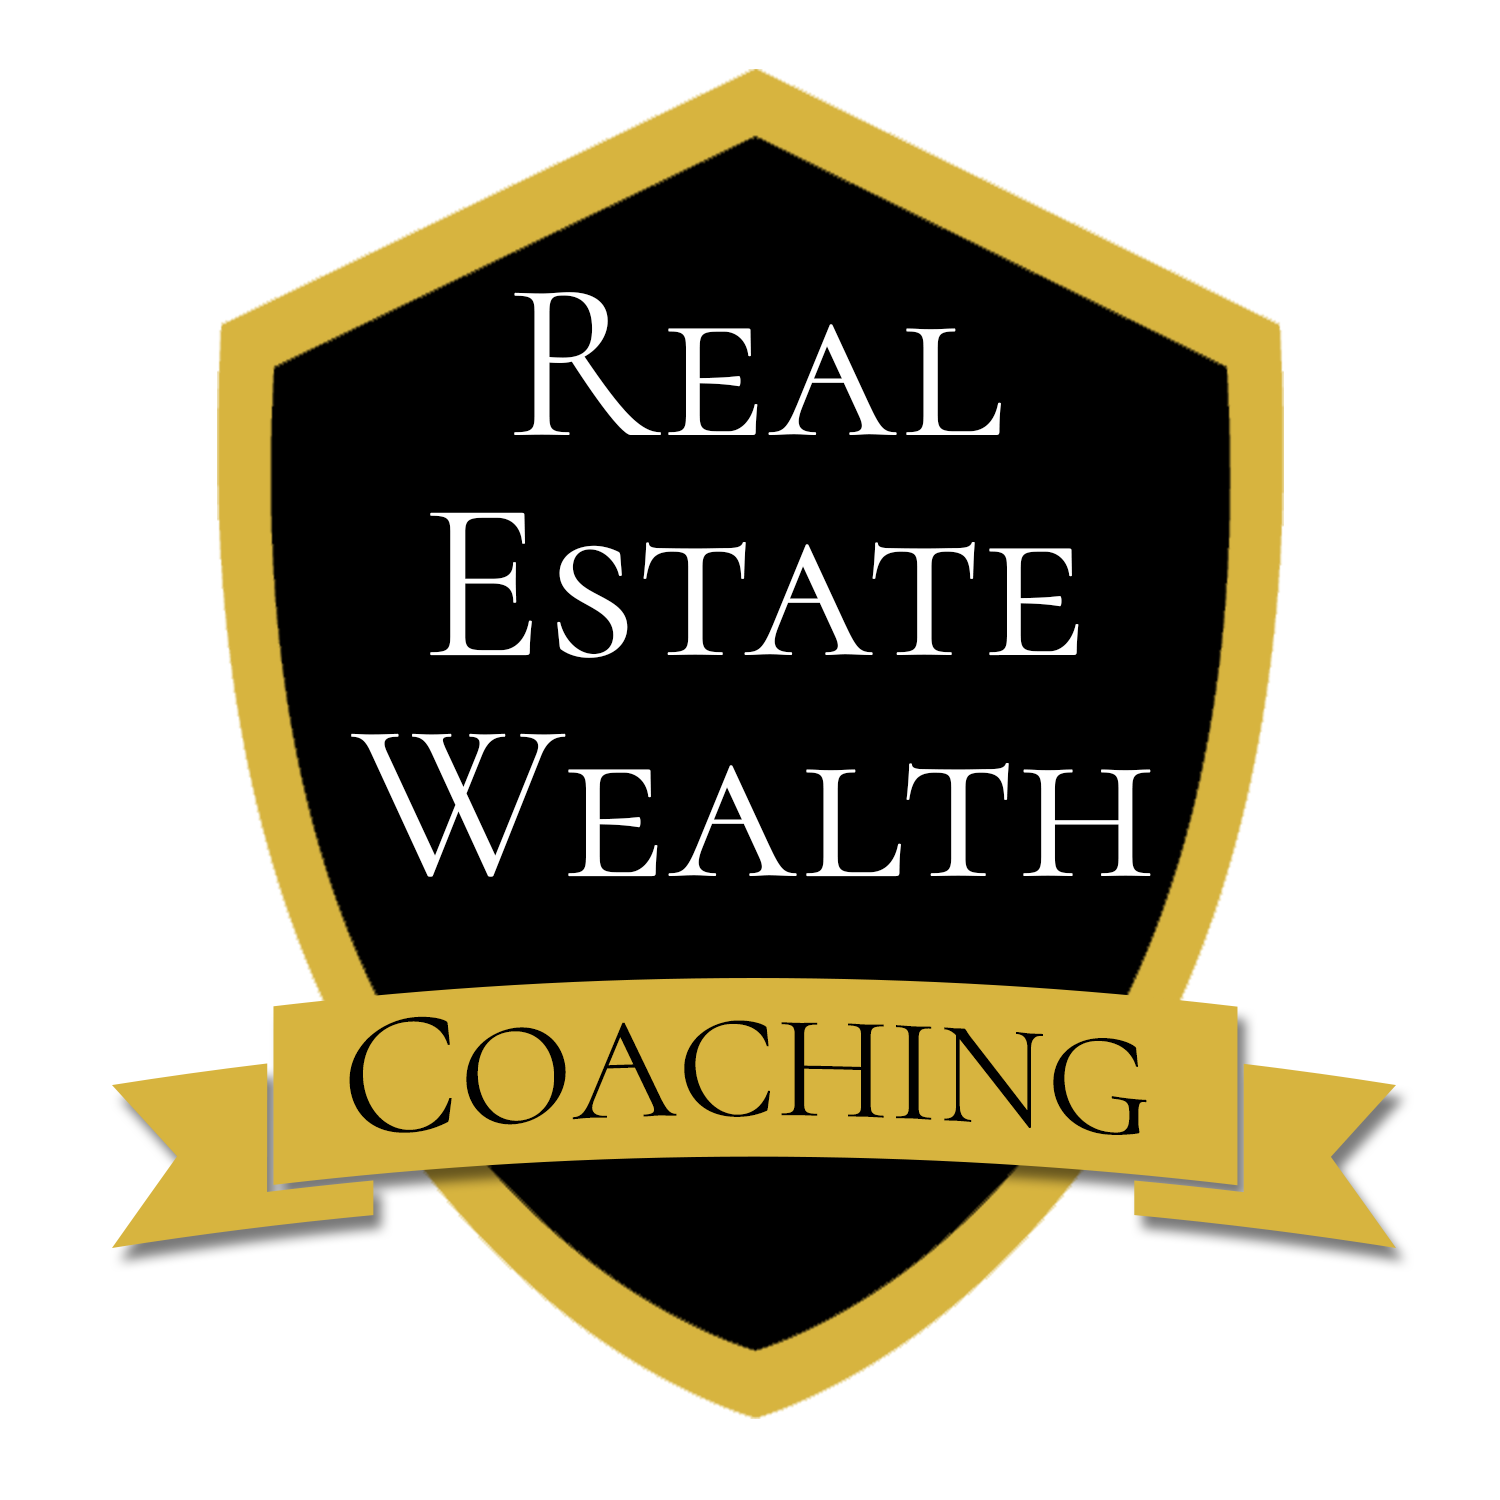 5 Questions to Ask Before You Invest in Real Estate Coaching